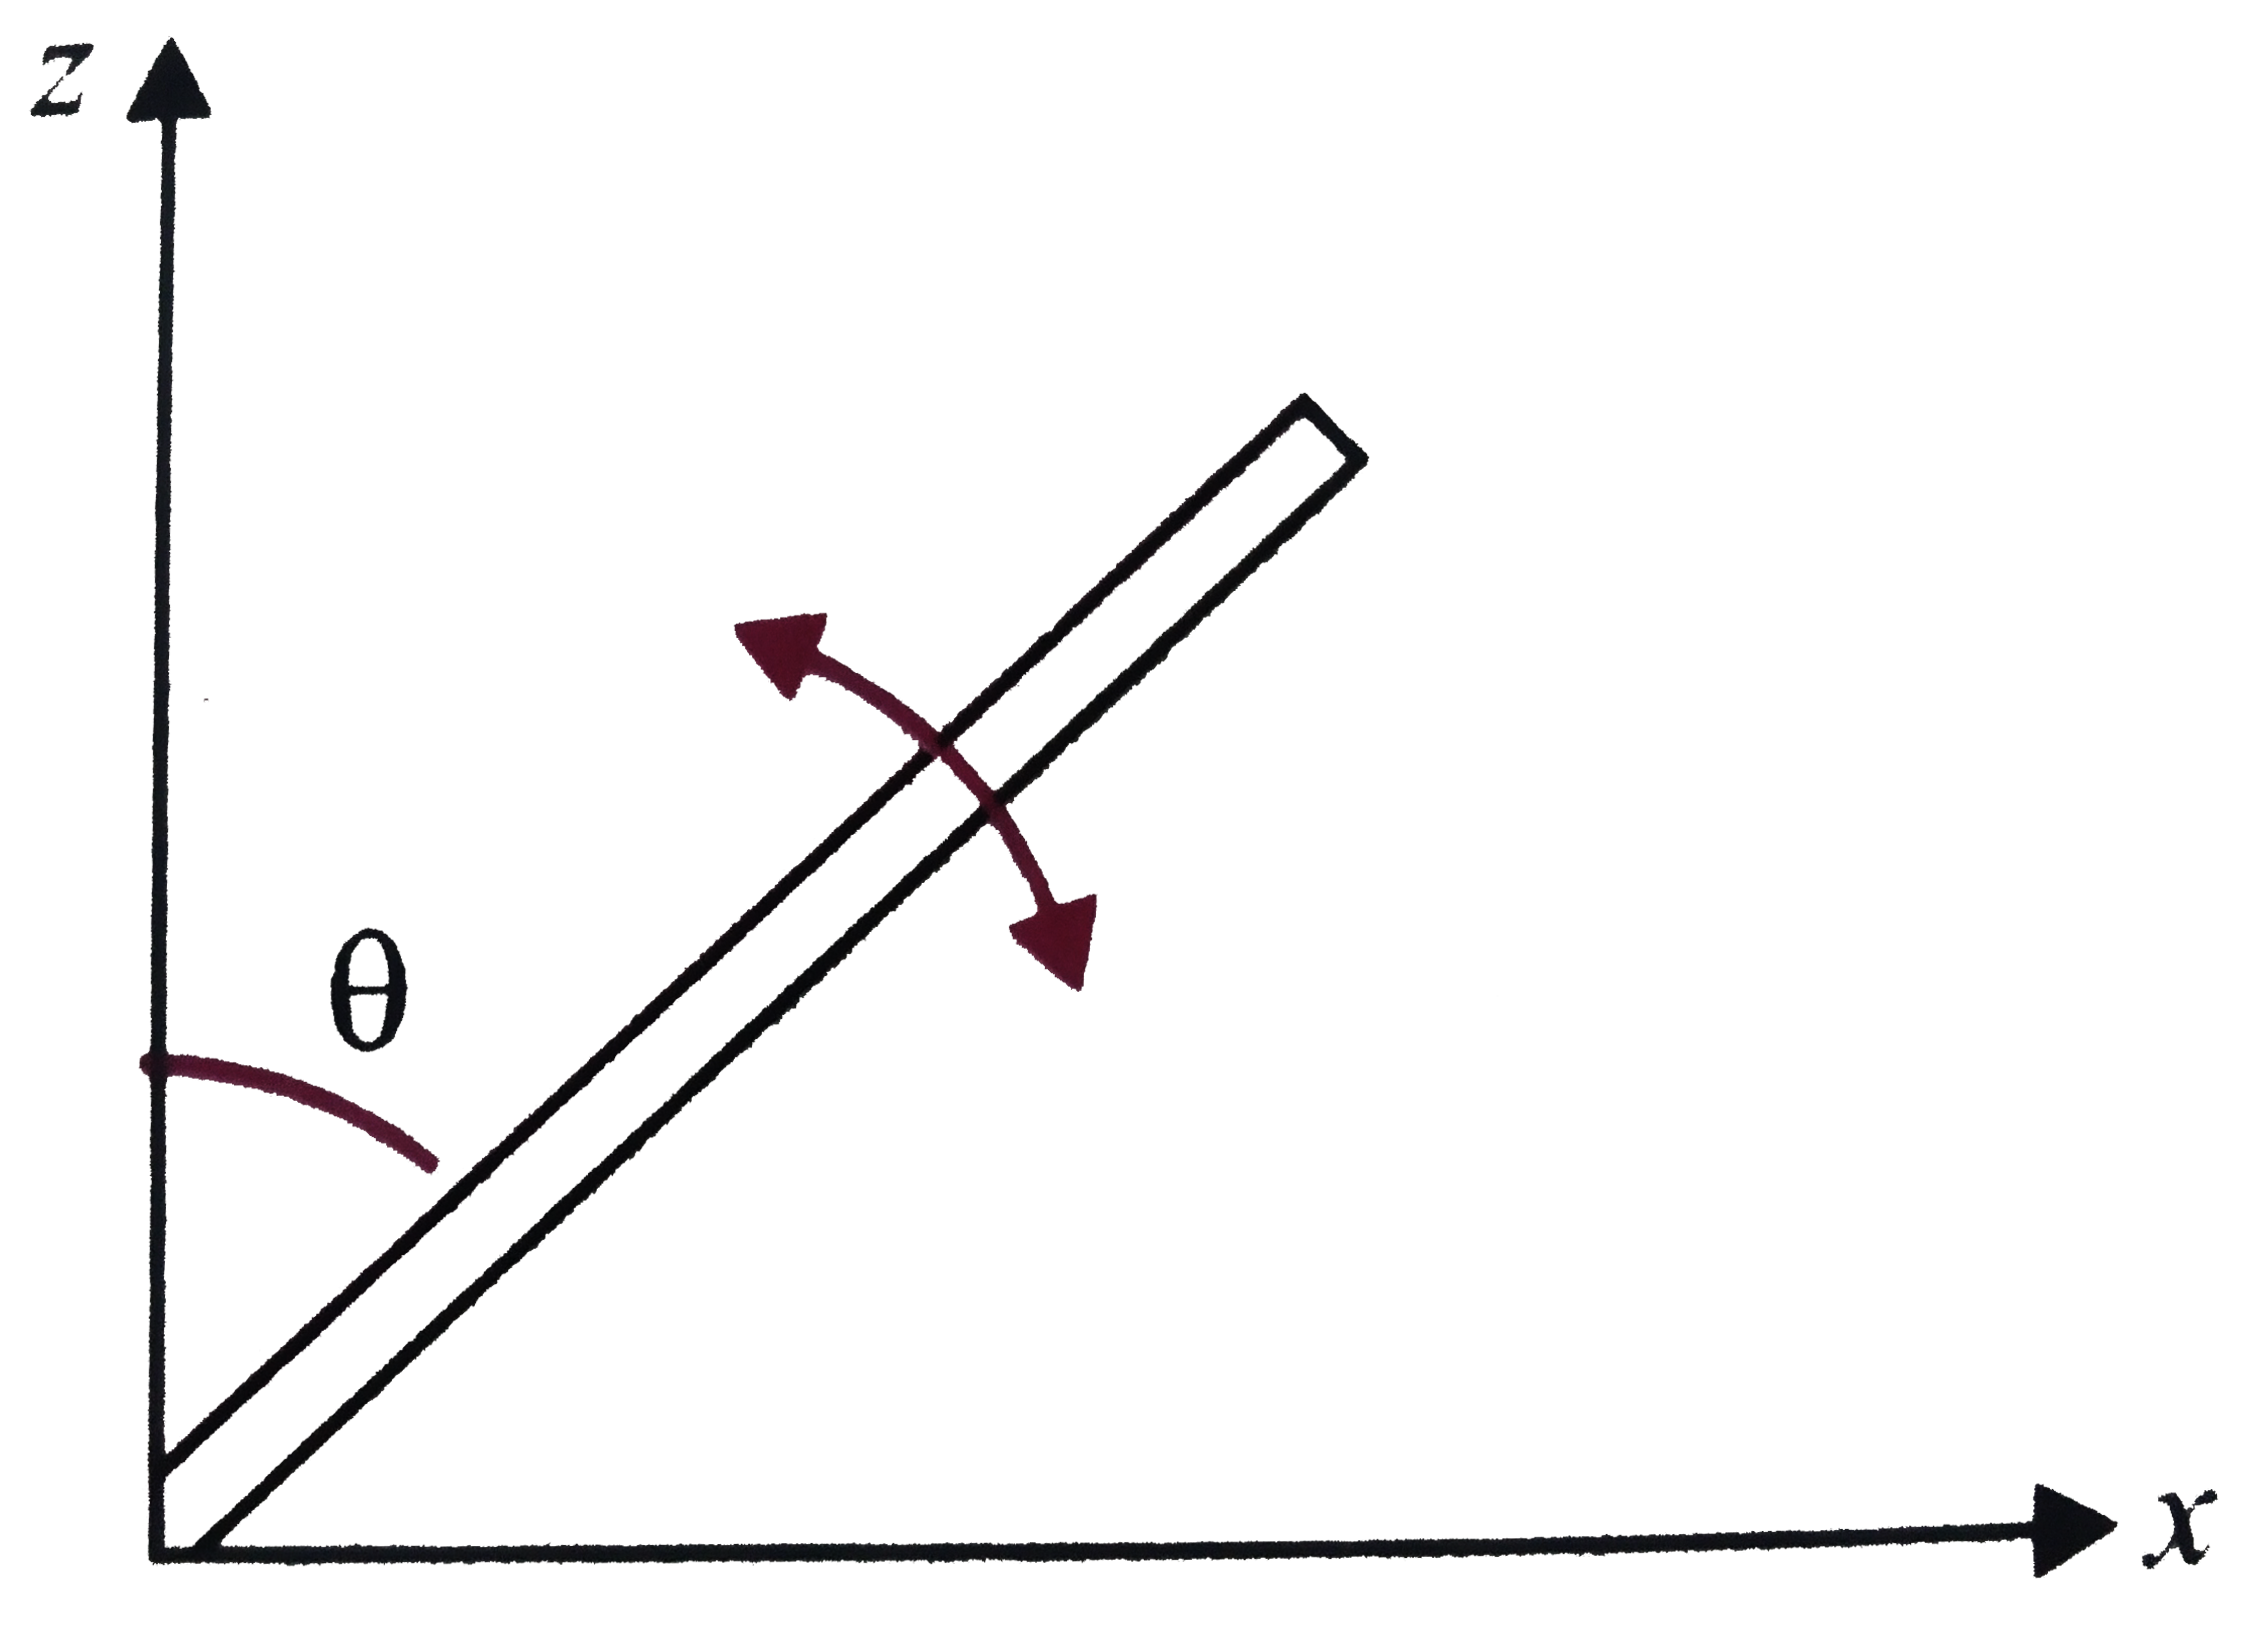 A slender uniform rod of mass M and length l is pivoted at one end so that it can rotate in a vertical plane, Fig. There is negligible friction at the pivot. The free end is held vertically above the pivot and then released. The angular acceleration of the rod when it makes an angle theta with the vertical is